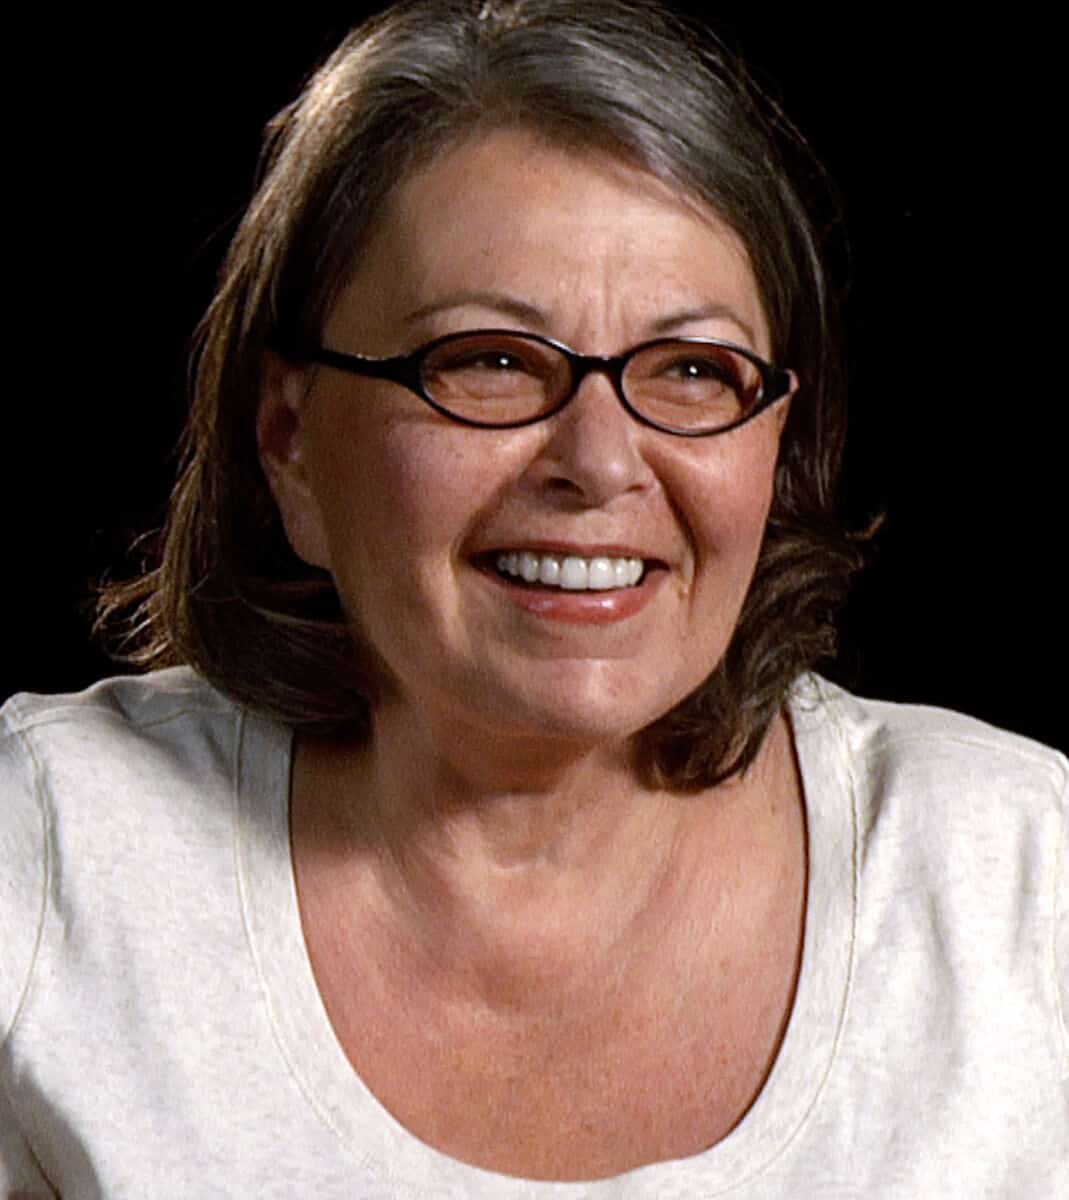 Roseanne Barr - Famous Television Producer